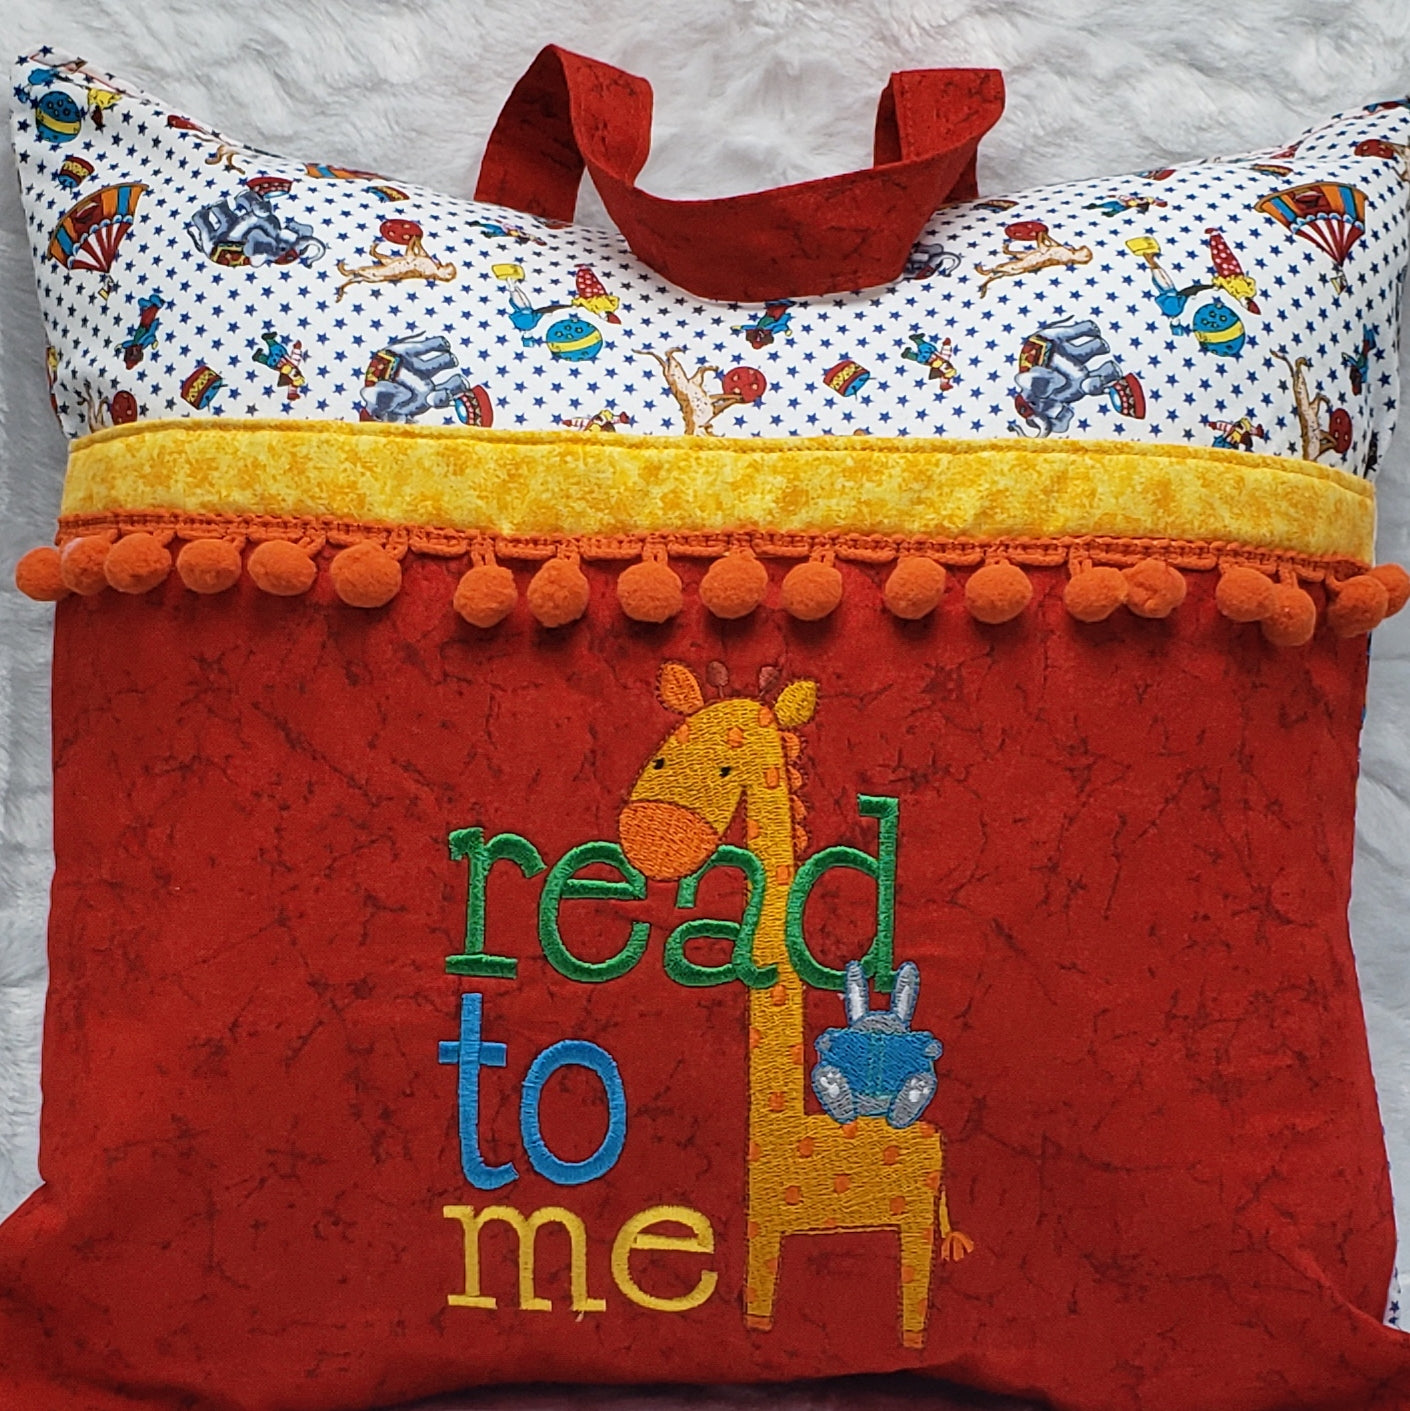 Read To Me Giraffe Reading Pillow Cover